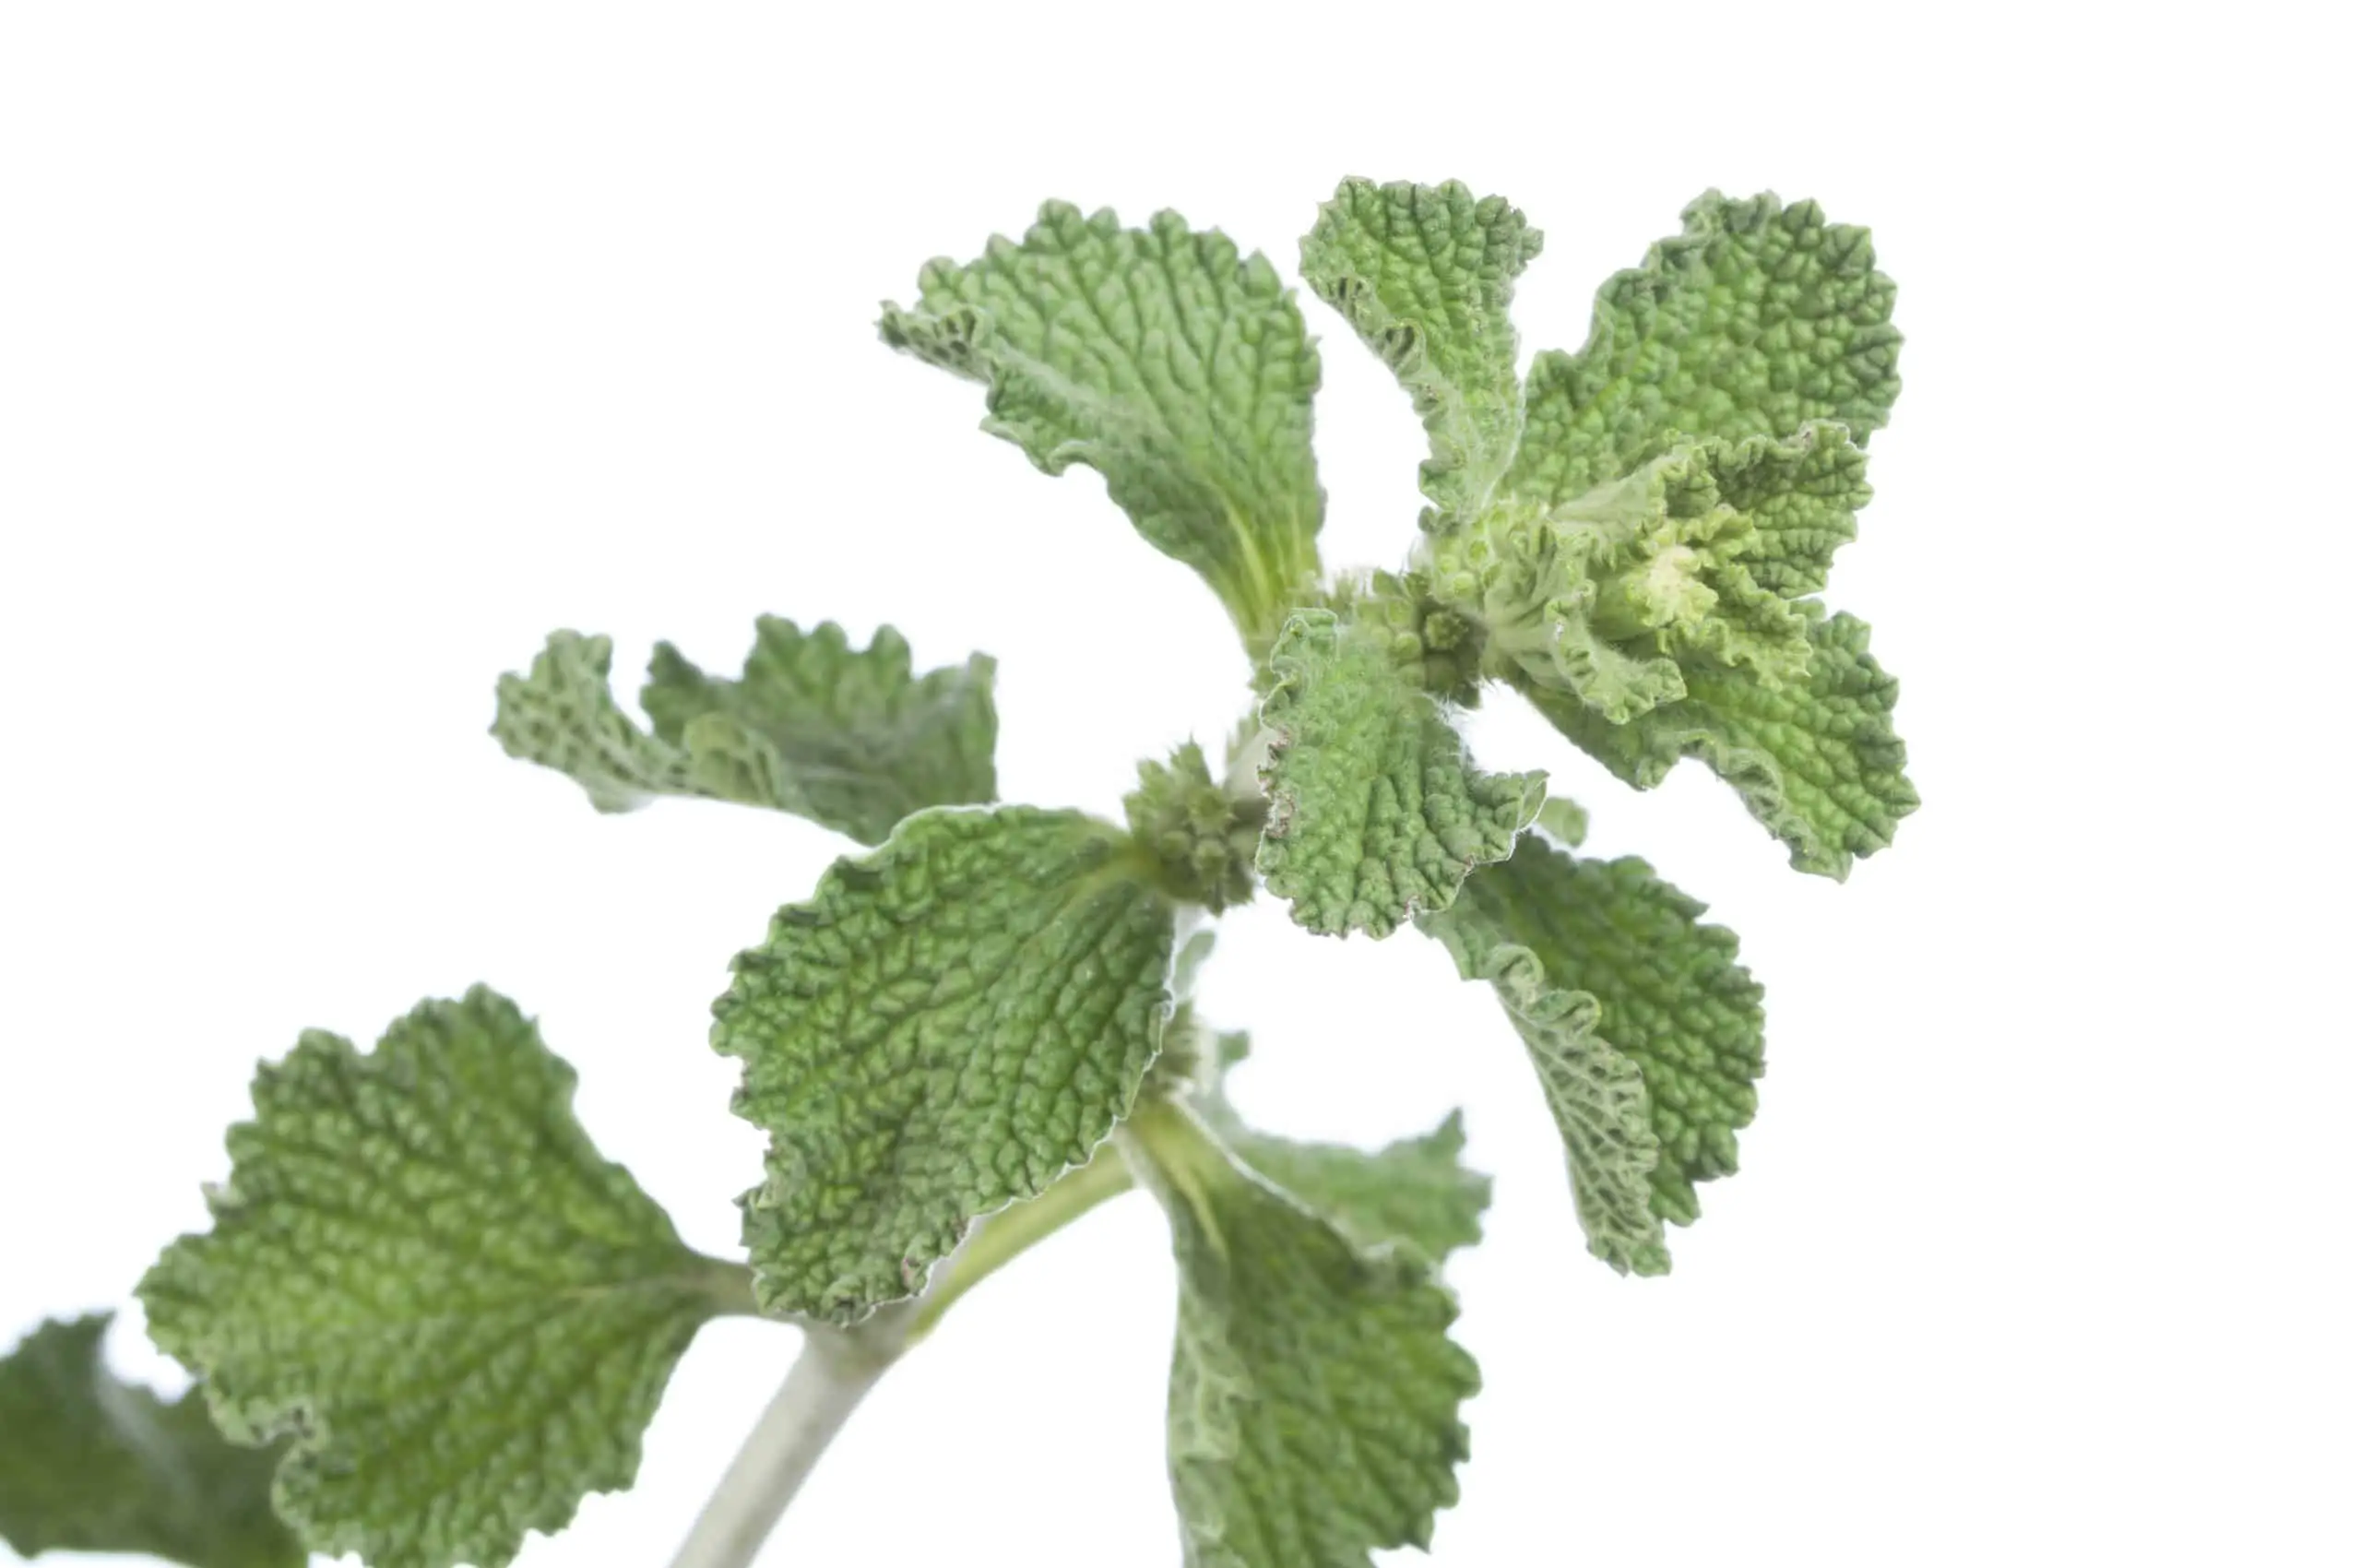 Horehound (Marrubium vulgare) is a species similar to the common nettle